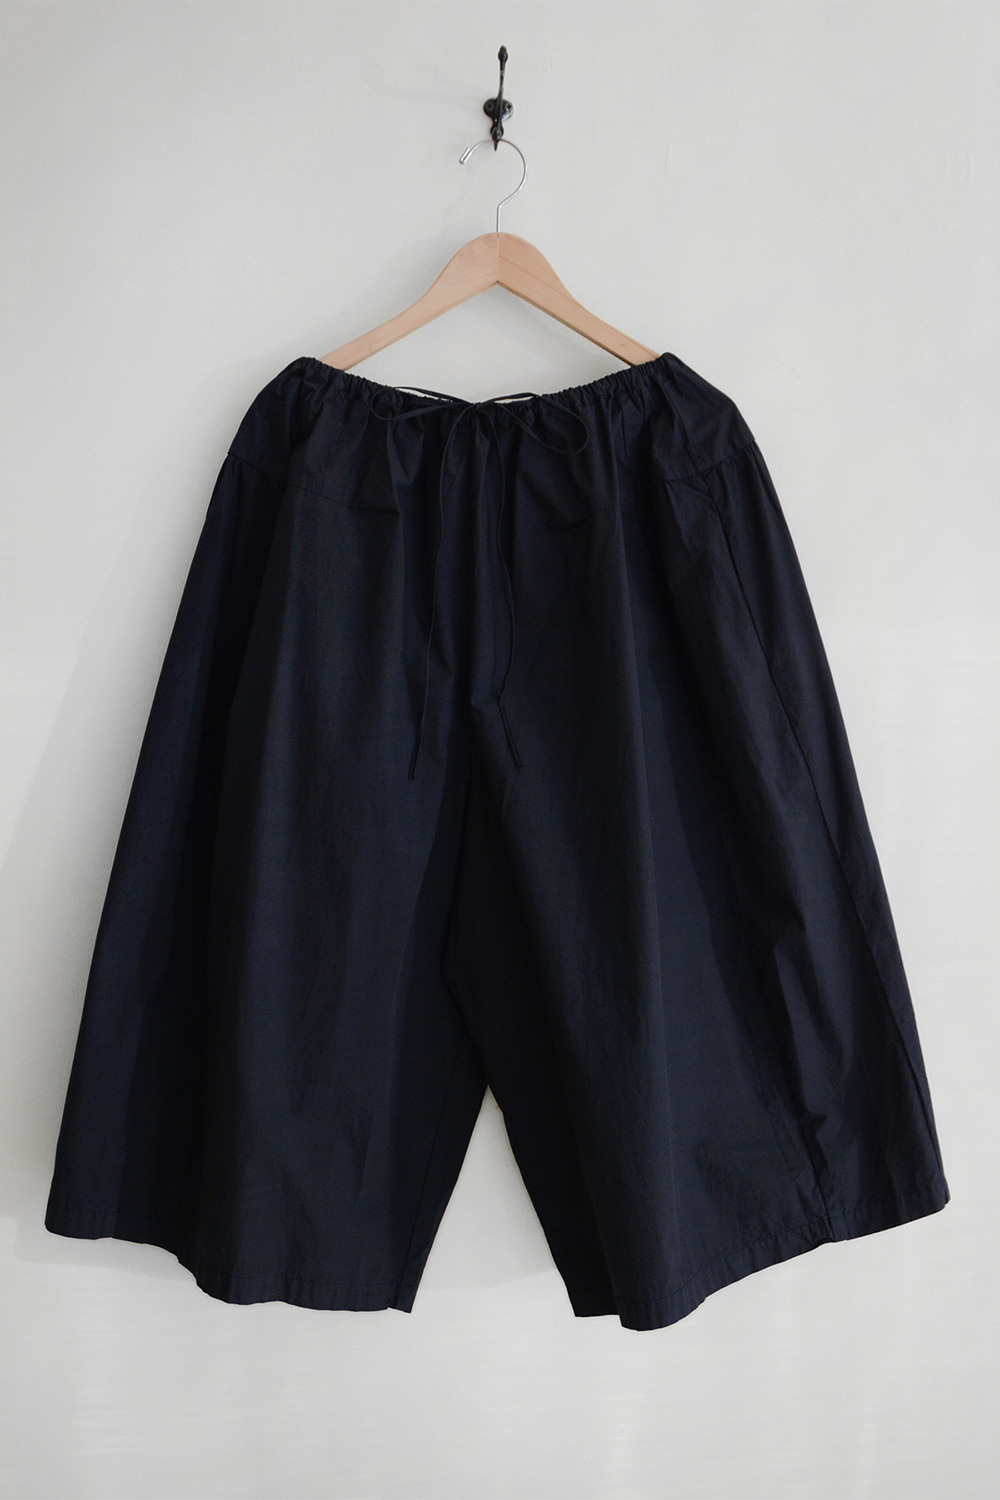 Manuelle Guibal 6454 Oversized Pants Navy Top Picture